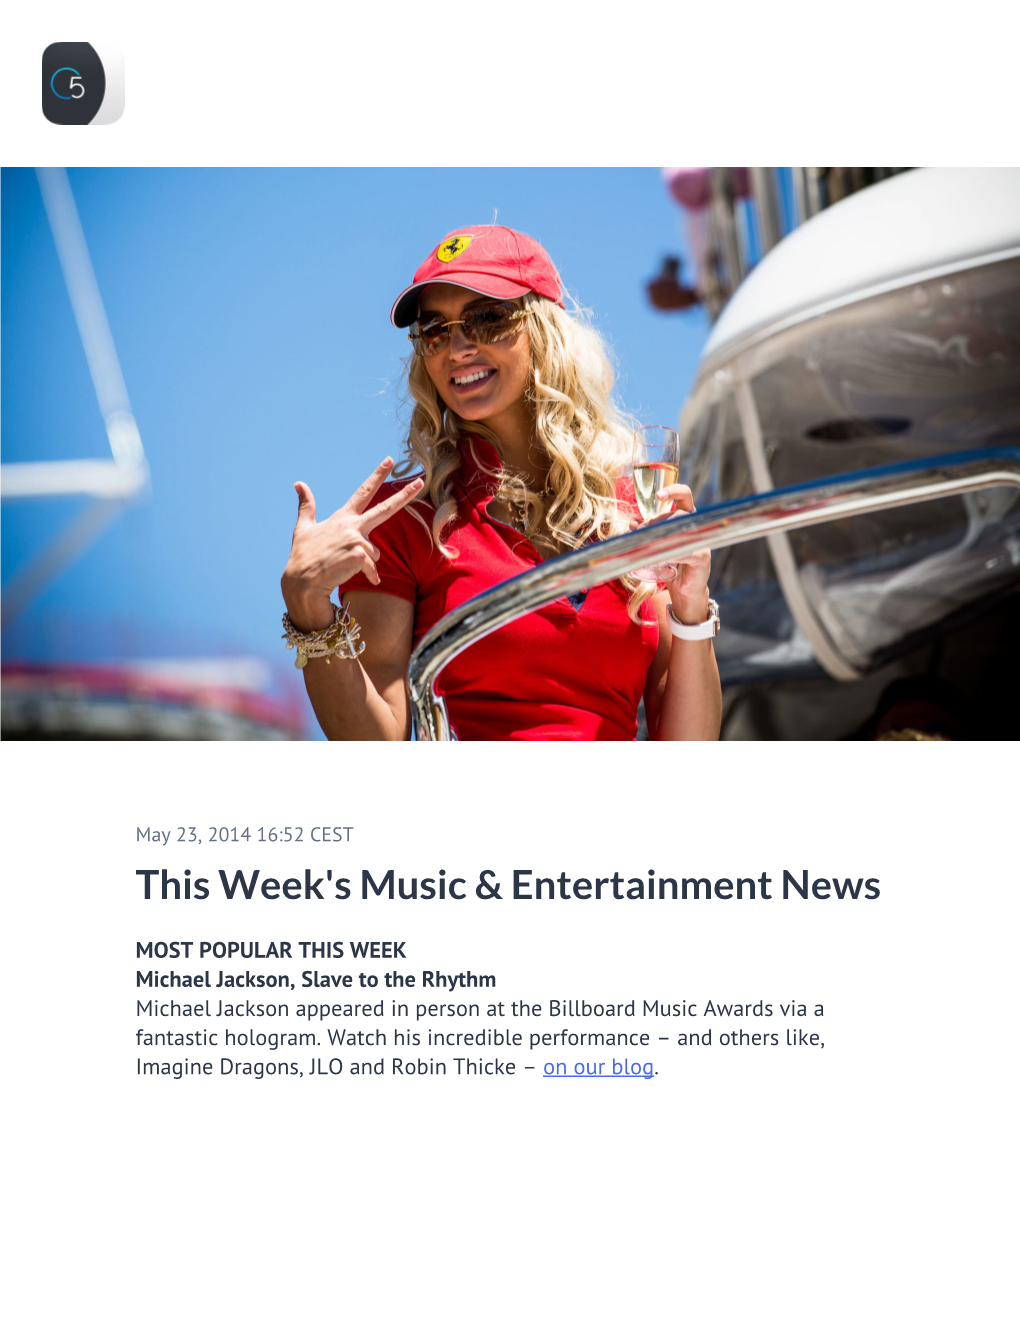 This Week's Music & Entertainment News